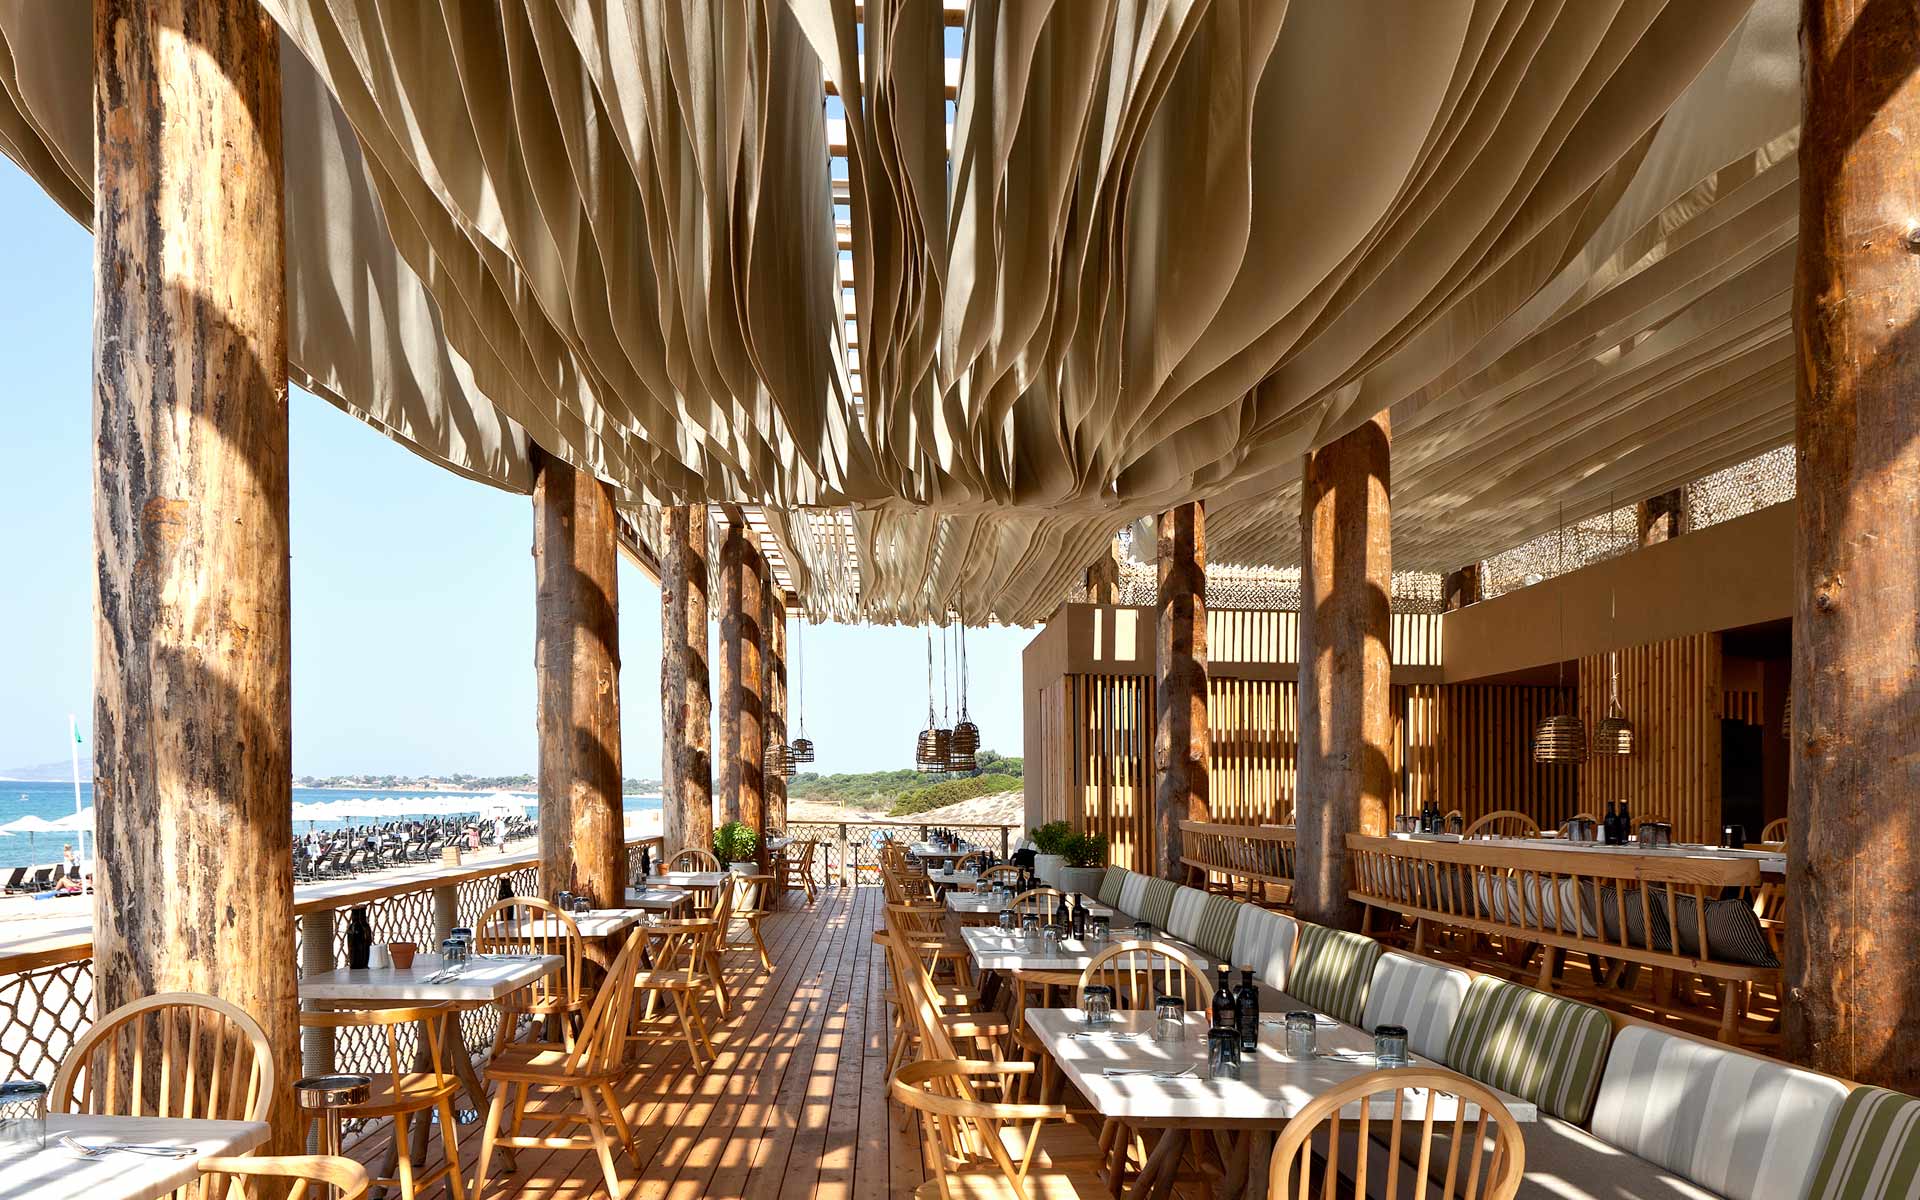 Restaurant sea view wooden game of light and shadow